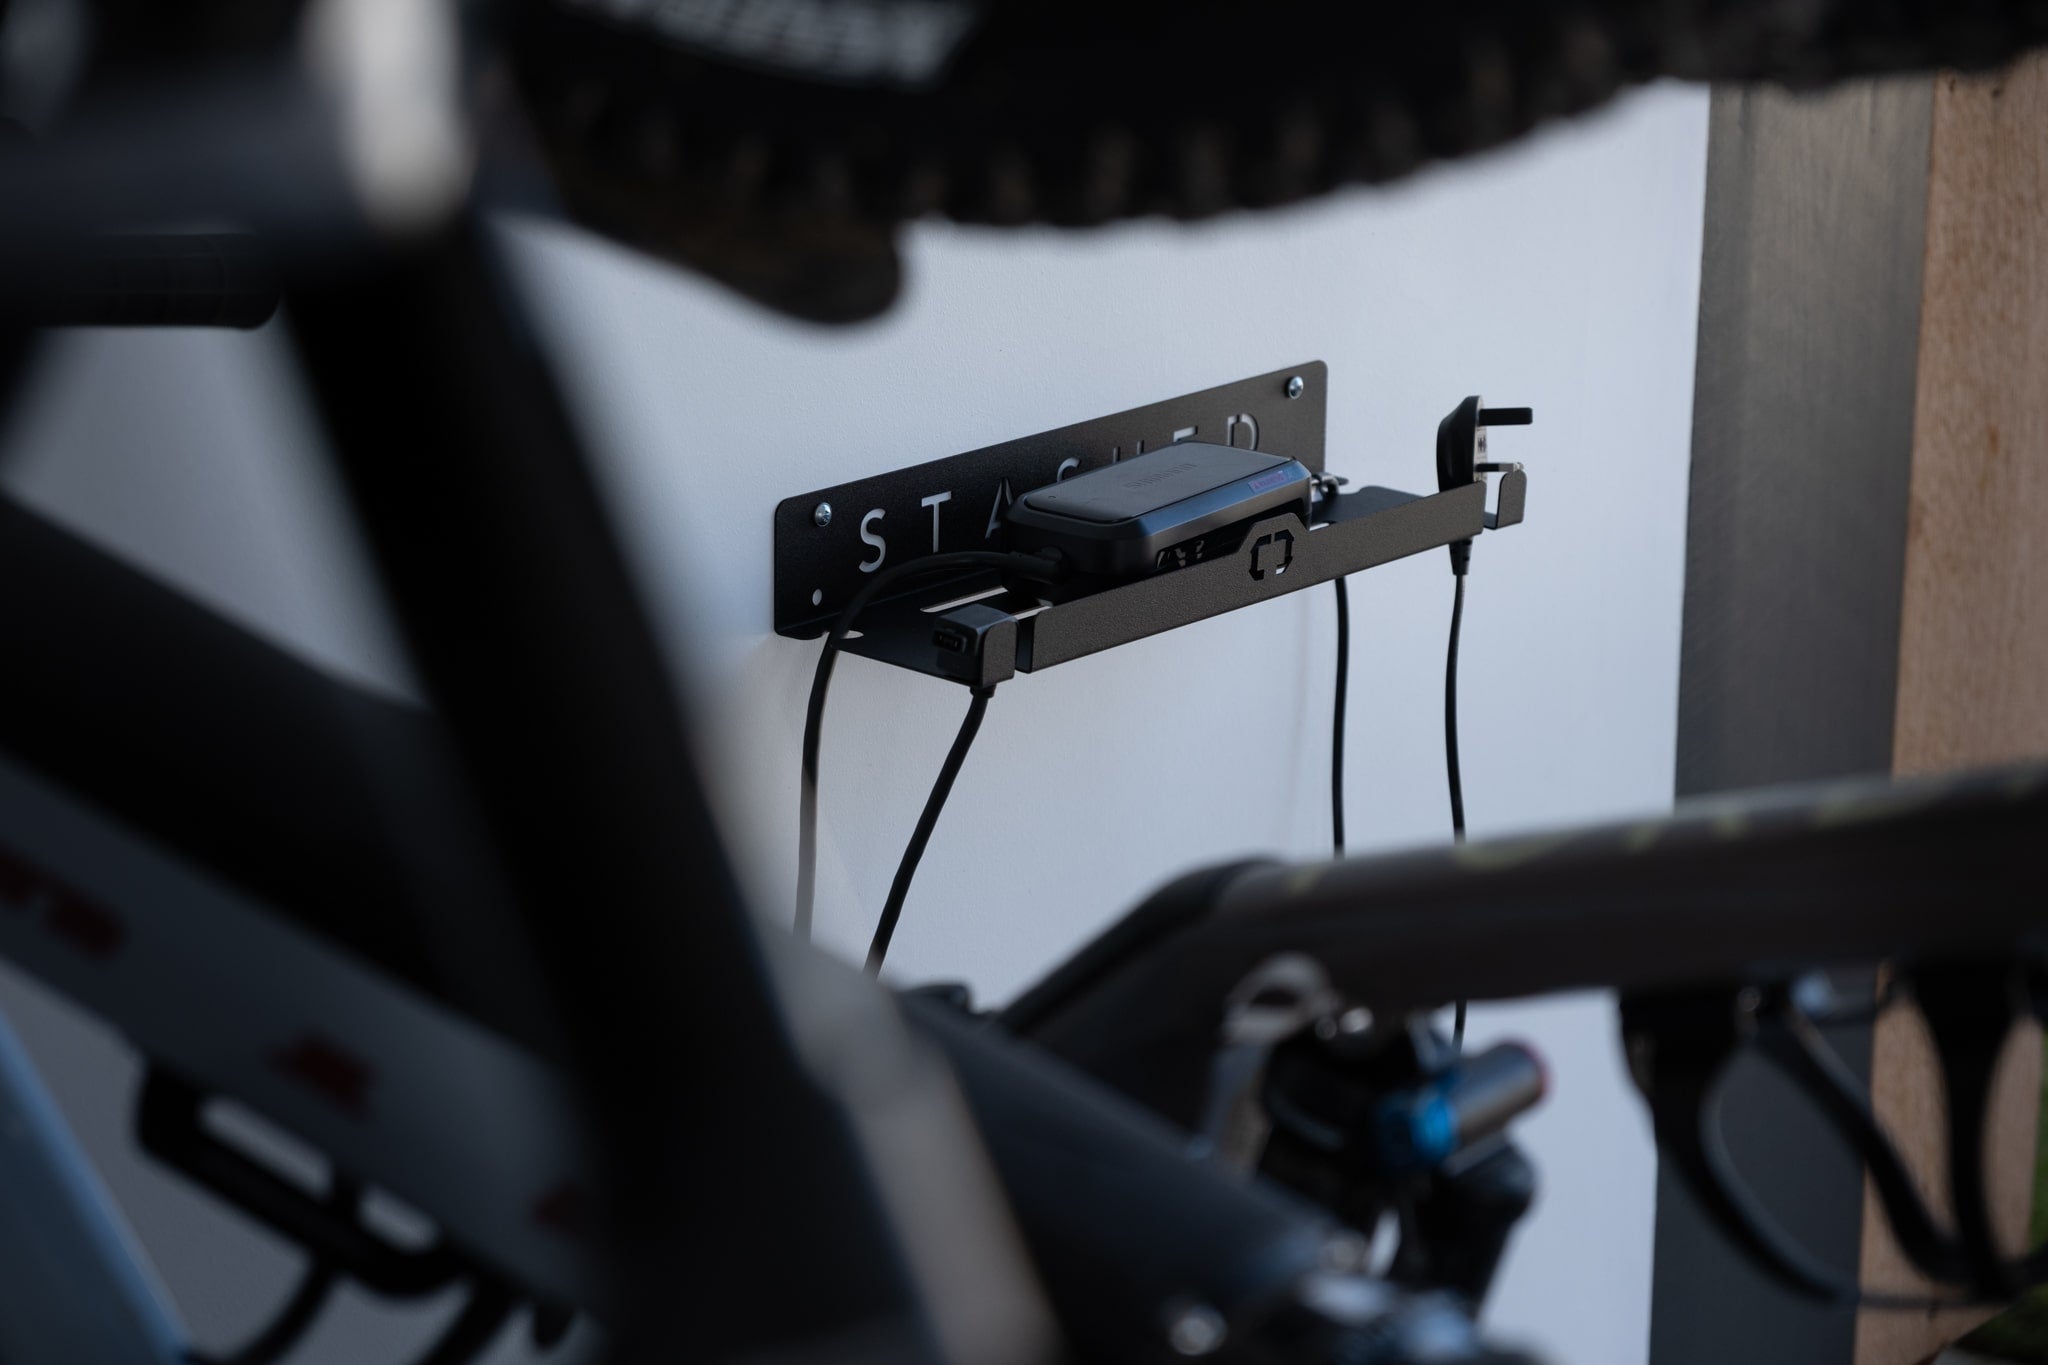 Upgrade bike storage spaces with accessories available to buy now